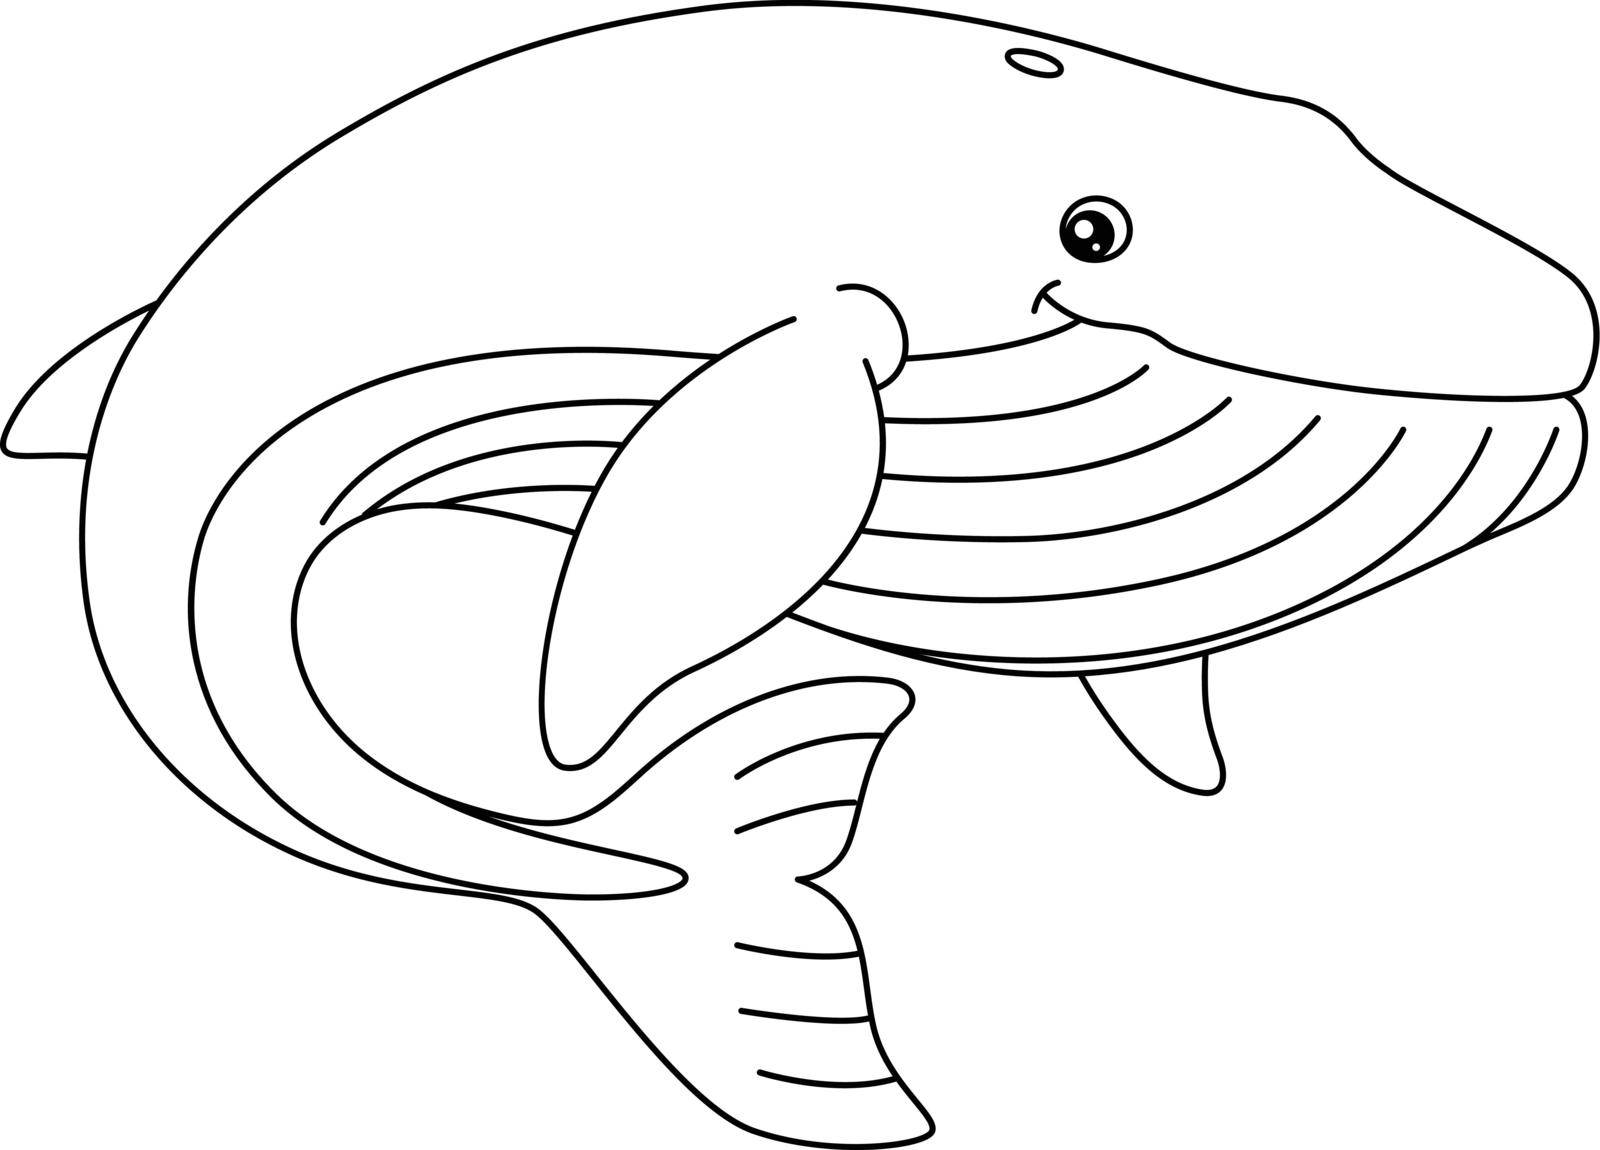 A cute and funny coloring page of a blue whale. Provides hours of coloring fun for children. To color, this page is very easy. Suitable for little kids and toddlers.